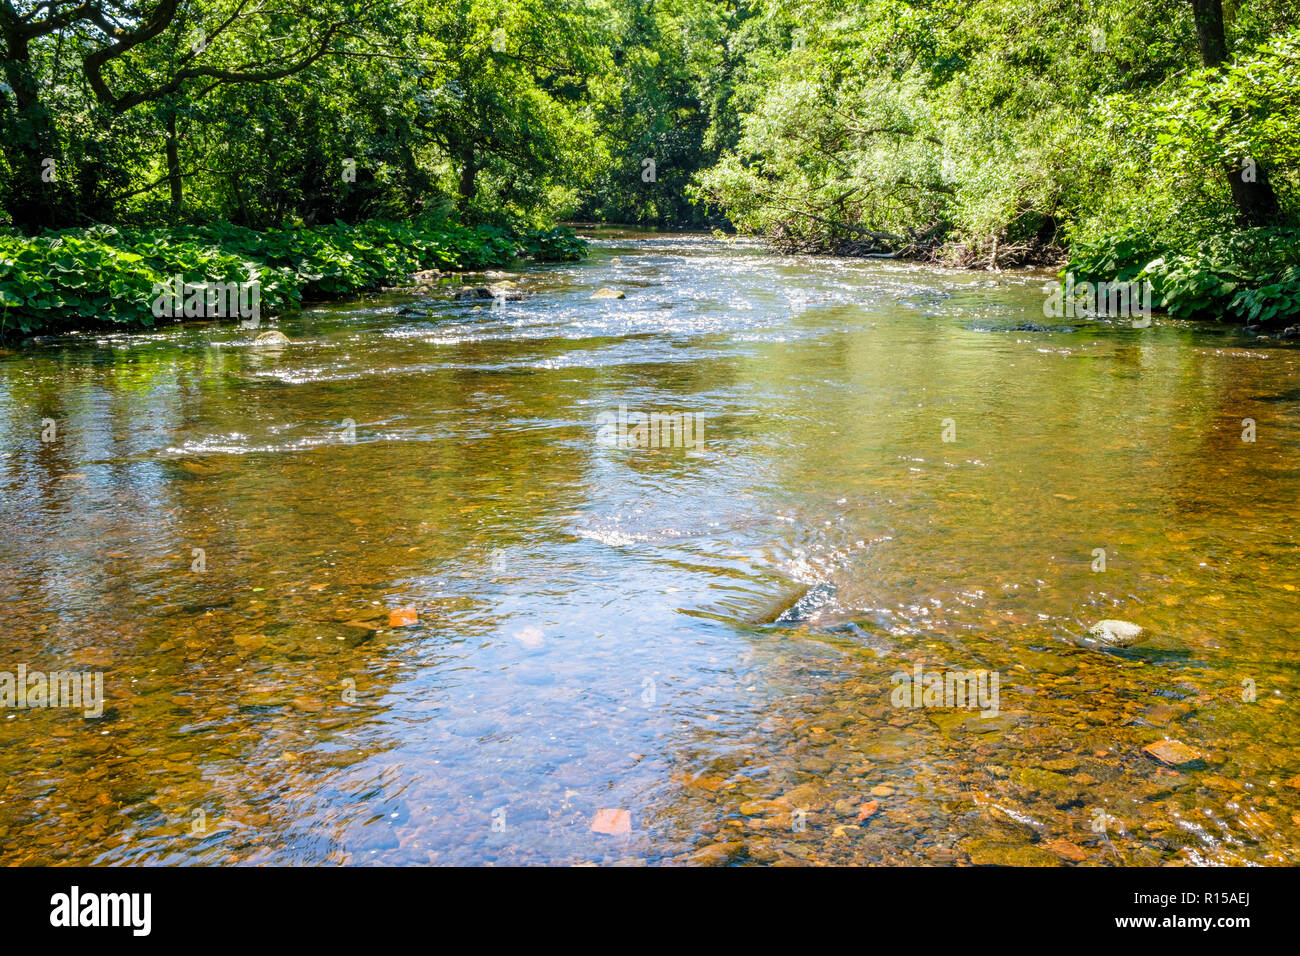 The shallow River Derwent in the height of Summer, flowing past trees in the Peak District countryside, near Hathersage, Derbyshire, England, UK Stock Photo